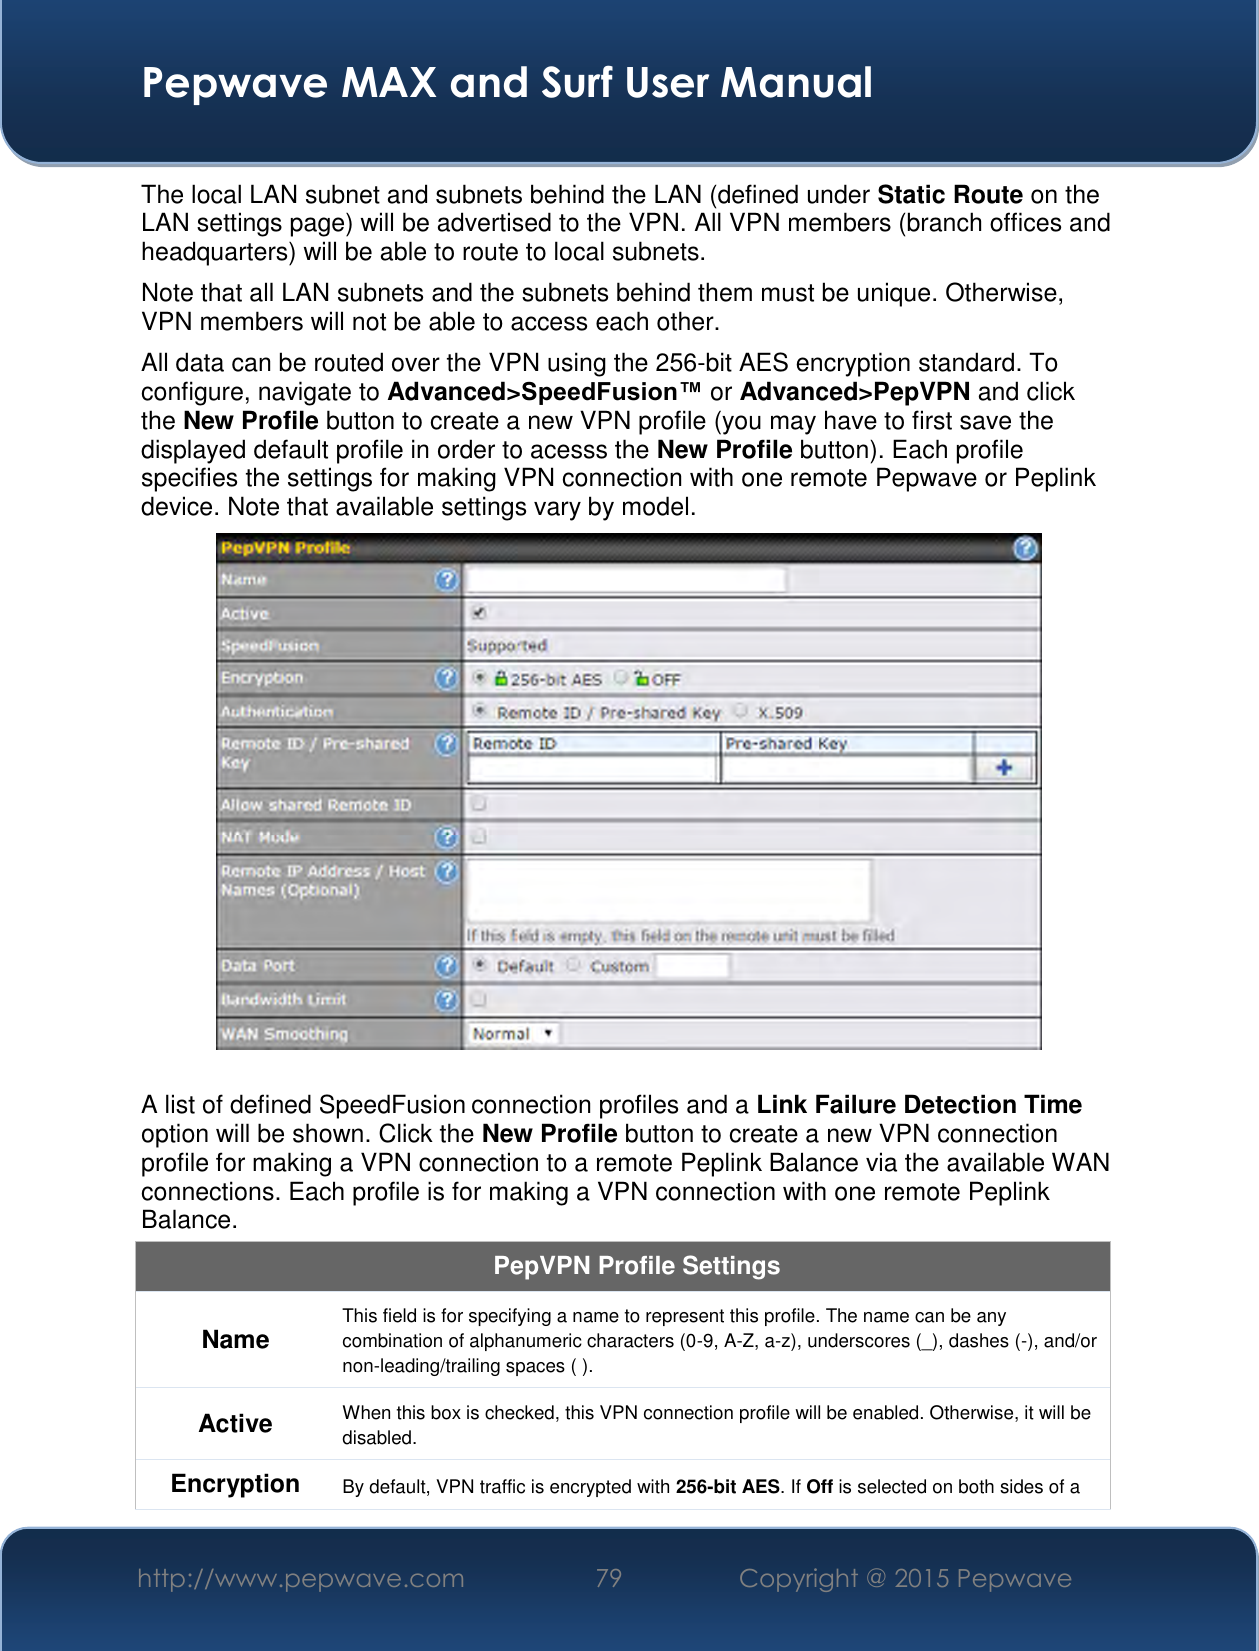  Pepwave MAX and Surf User Manual http://www.pepwave.com 79   Copyright @ 2015 Pepwave   The local LAN subnet and subnets behind the LAN (defined under Static Route on the LAN settings page) will be advertised to the VPN. All VPN members (branch offices and headquarters) will be able to route to local subnets. Note that all LAN subnets and the subnets behind them must be unique. Otherwise, VPN members will not be able to access each other. All data can be routed over the VPN using the 256-bit AES encryption standard. To configure, navigate to Advanced&gt;SpeedFusion™ or Advanced&gt;PepVPN and click the New Profile button to create a new VPN profile (you may have to first save the displayed default profile in order to acesss the New Profile button). Each profile specifies the settings for making VPN connection with one remote Pepwave or Peplink device. Note that available settings vary by model.   A list of defined SpeedFusion connection profiles and a Link Failure Detection Time option will be shown. Click the New Profile button to create a new VPN connection profile for making a VPN connection to a remote Peplink Balance via the available WAN connections. Each profile is for making a VPN connection with one remote Peplink Balance. PepVPN Profile Settings Name This field is for specifying a name to represent this profile. The name can be any combination of alphanumeric characters (0-9, A-Z, a-z), underscores (_), dashes (-), and/or non-leading/trailing spaces ( ). Active When this box is checked, this VPN connection profile will be enabled. Otherwise, it will be disabled. Encryption By default, VPN traffic is encrypted with 256-bit AES. If Off is selected on both sides of a 